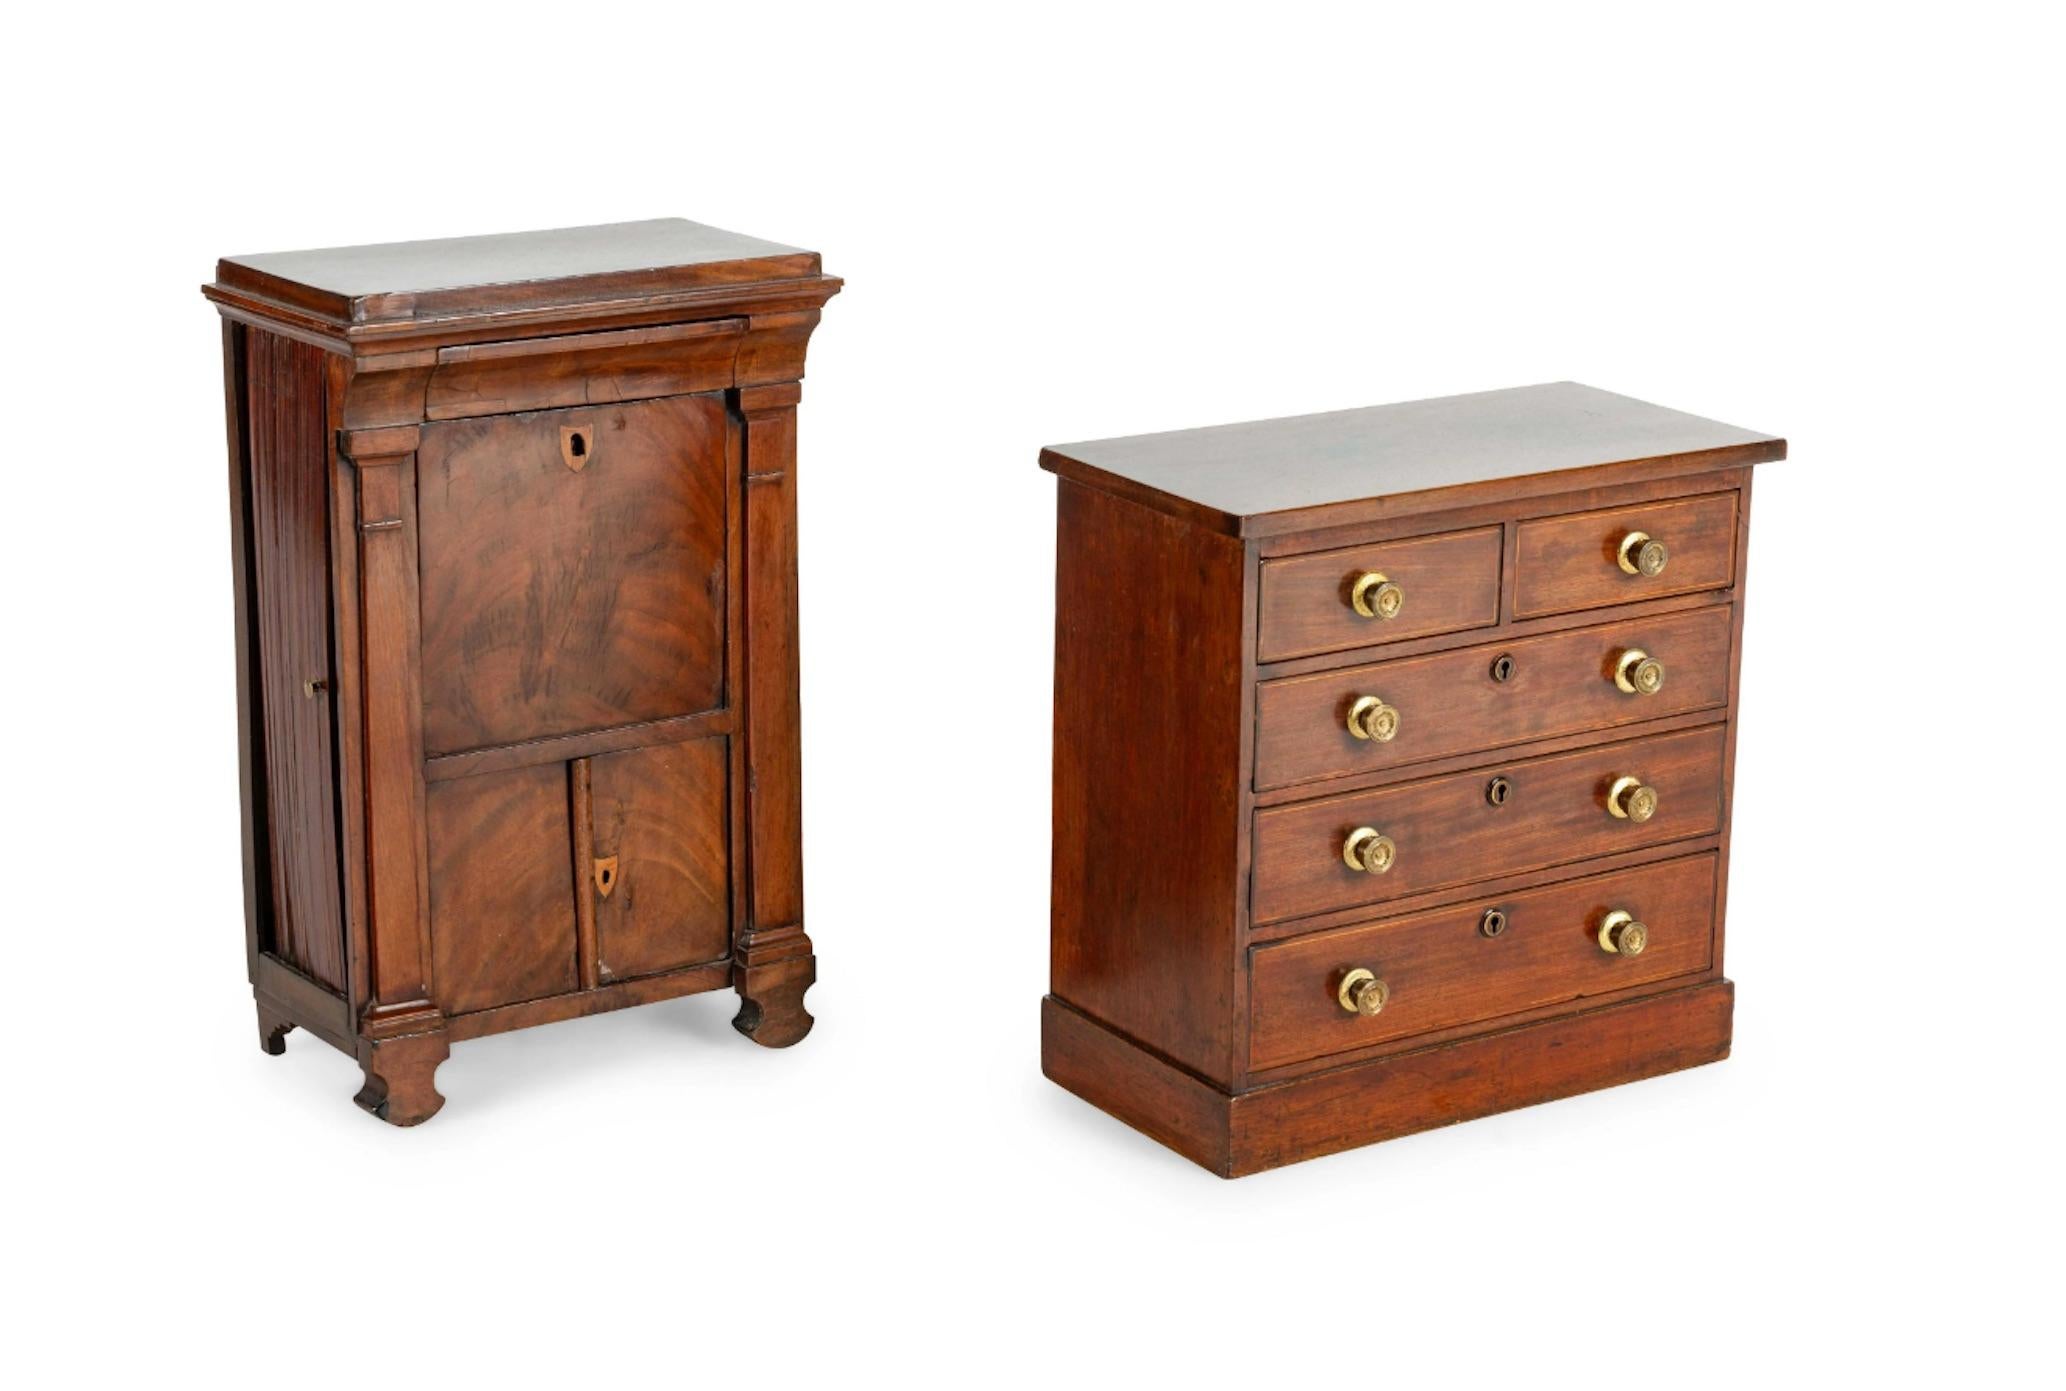 A 19th century Directoire diminutive walnut Secrétaire a' Abattant and a similar diminutive five-drawer chest. Great small drinks table or jewelry chest. Great attention paid to detail. Priced per piece.